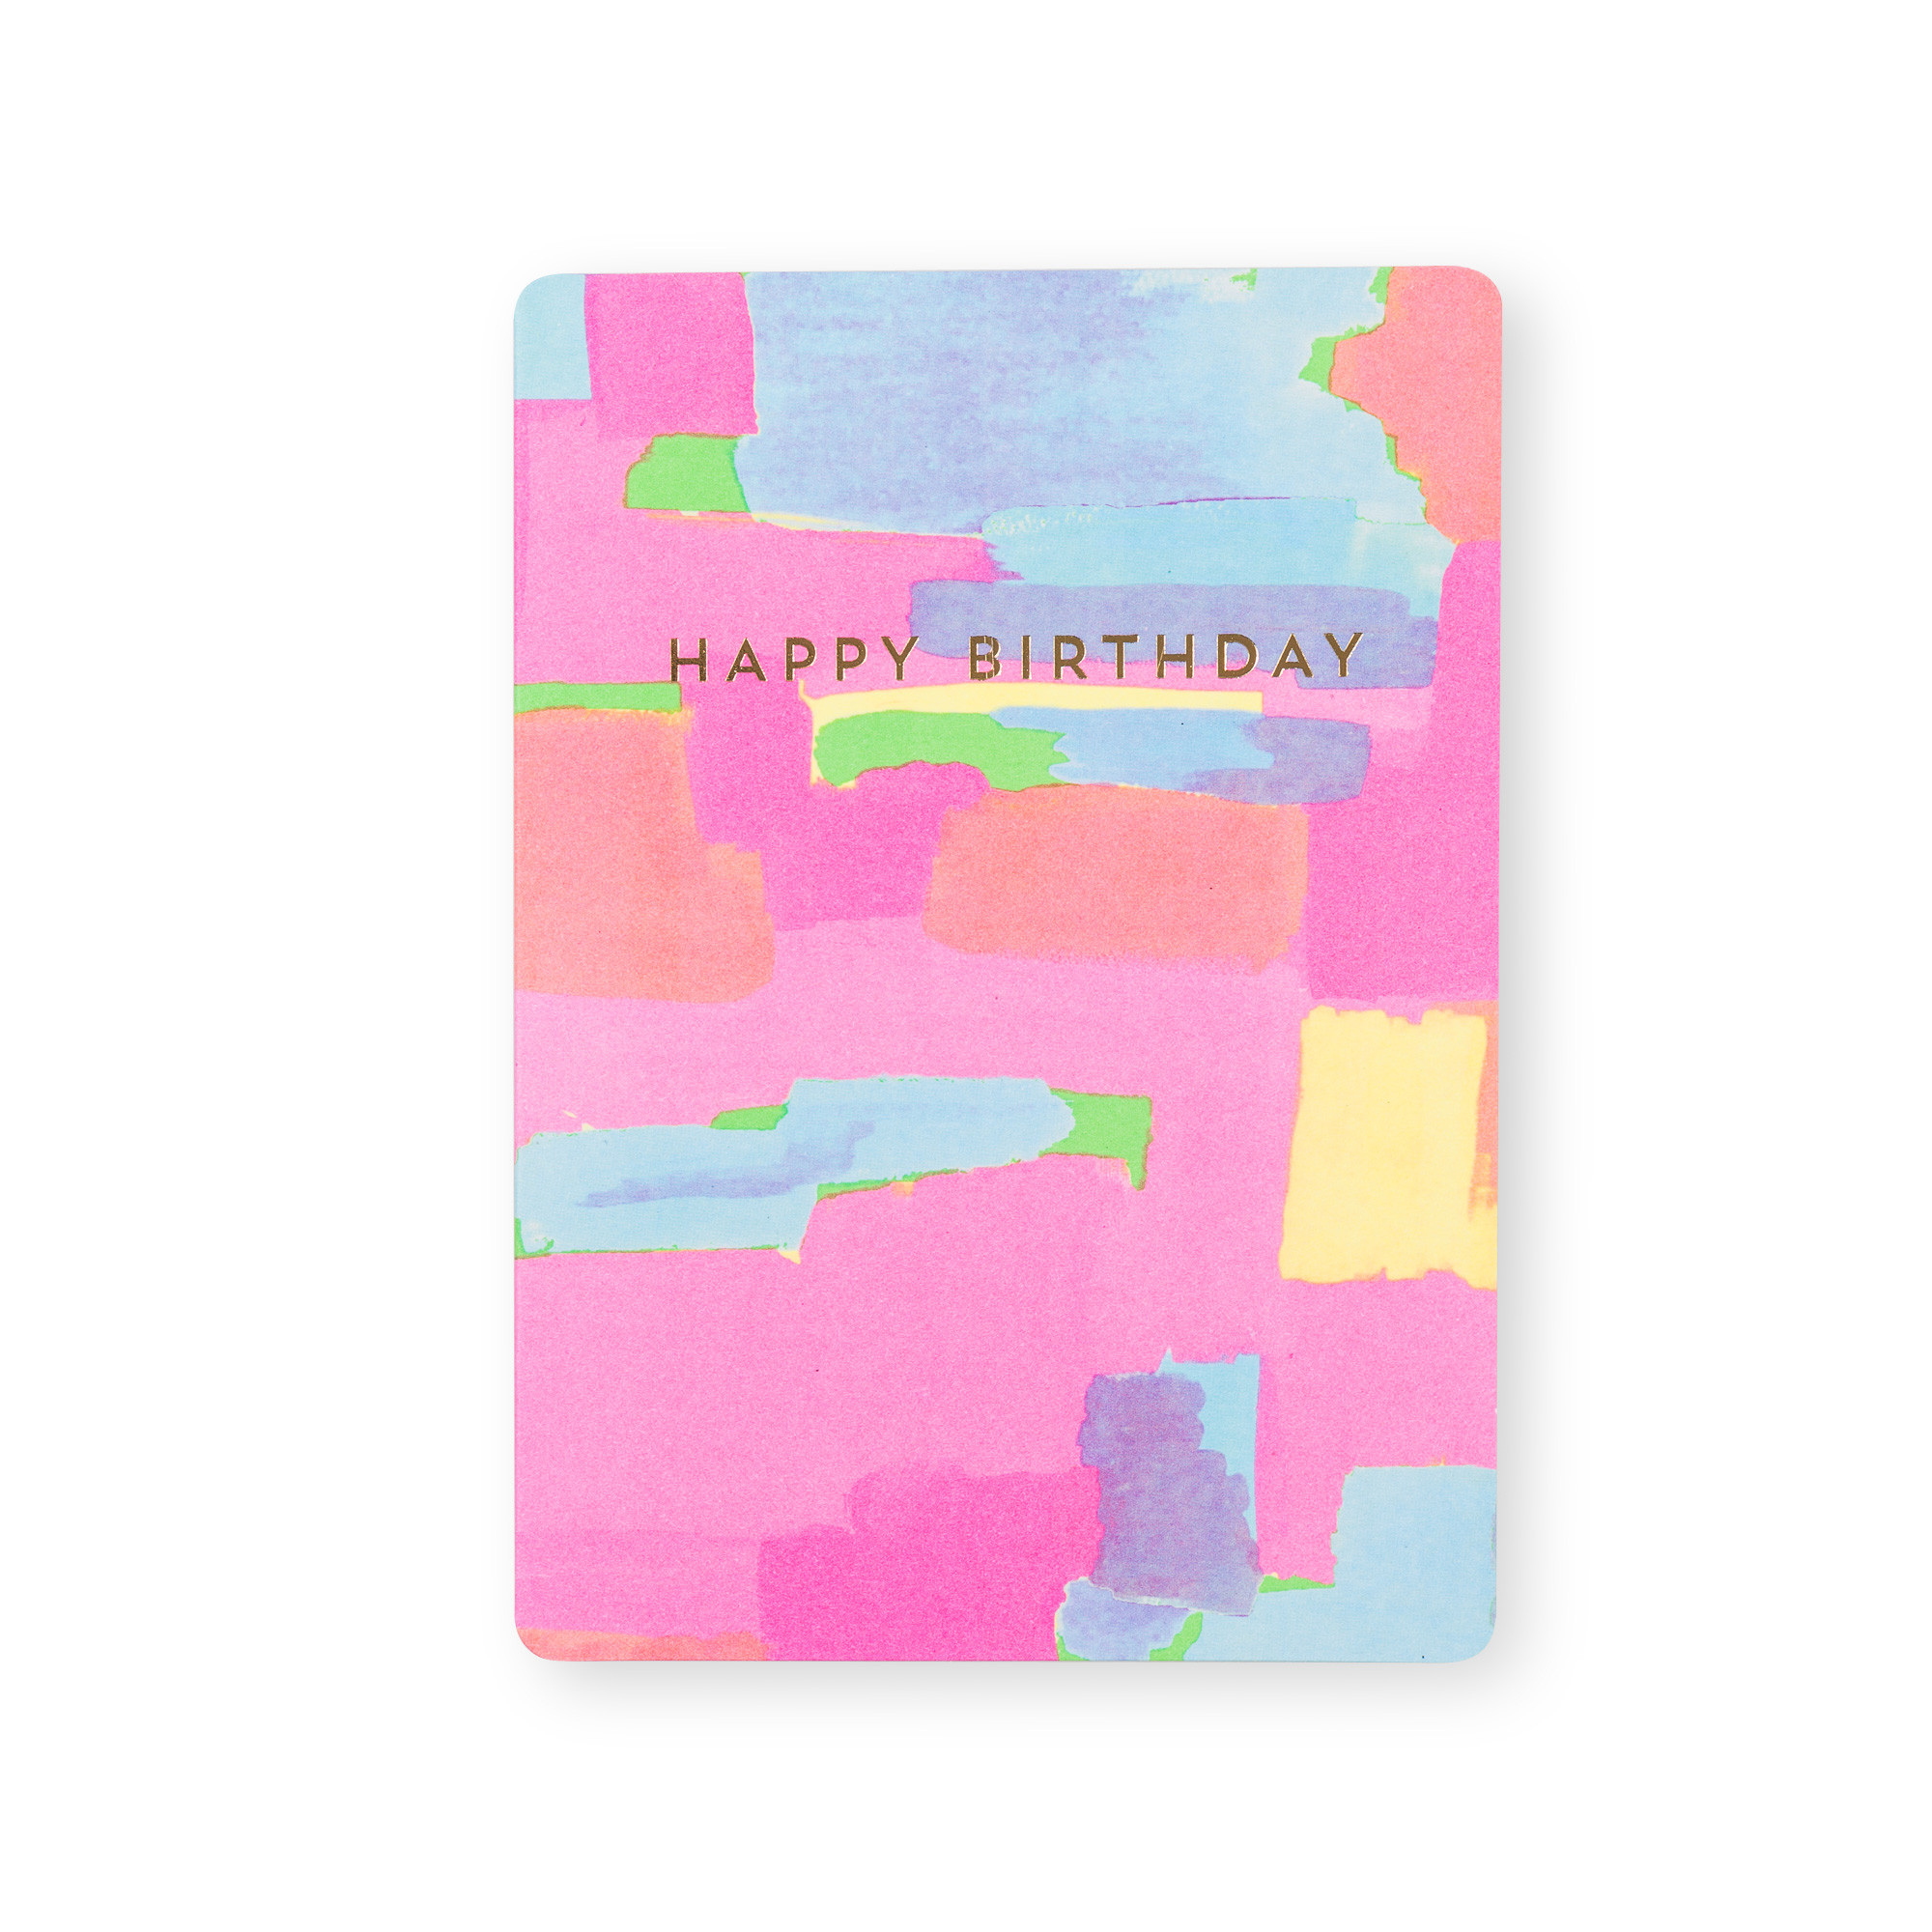 Simple Birthday Gifts For Her
 Happy Birthday Mark Making Print Card Gifts for Her